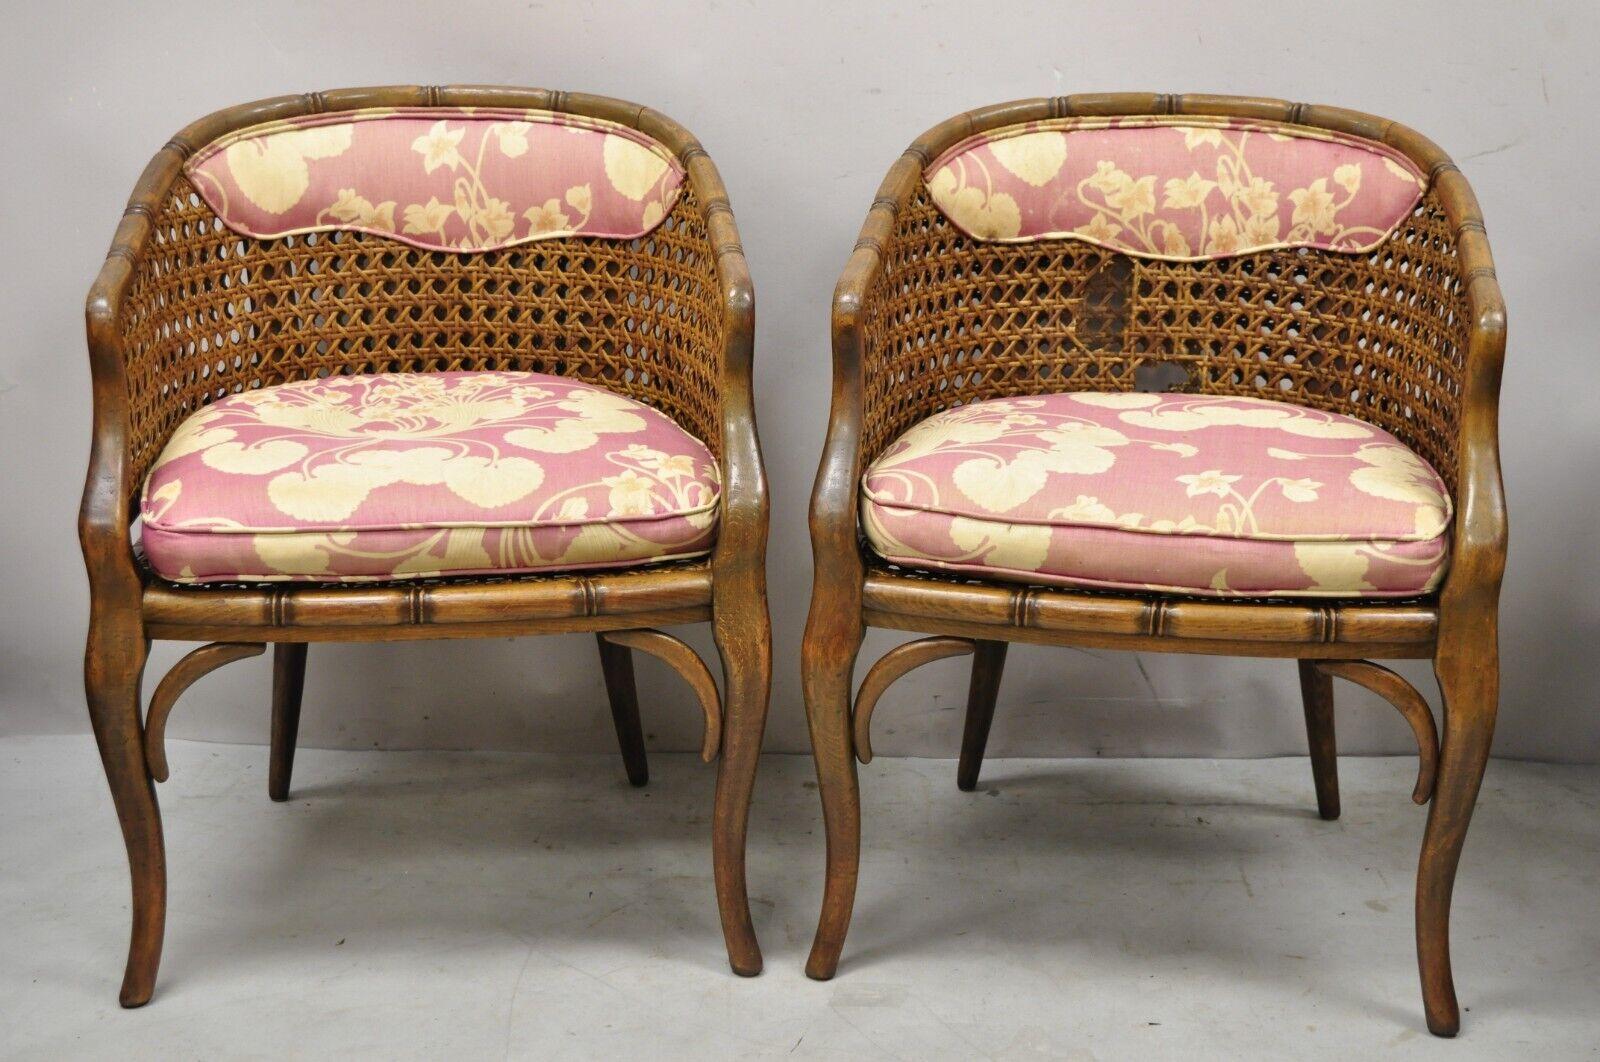 Pair of Vintage Hollywood Regency Faux bamboo cane barrel back club lounge chairs (A). Item features cane seat and back, faux bamboo carved wood frames, very nice vintage pair, great style and form. Circa Mid 20th Century. Measurement 31